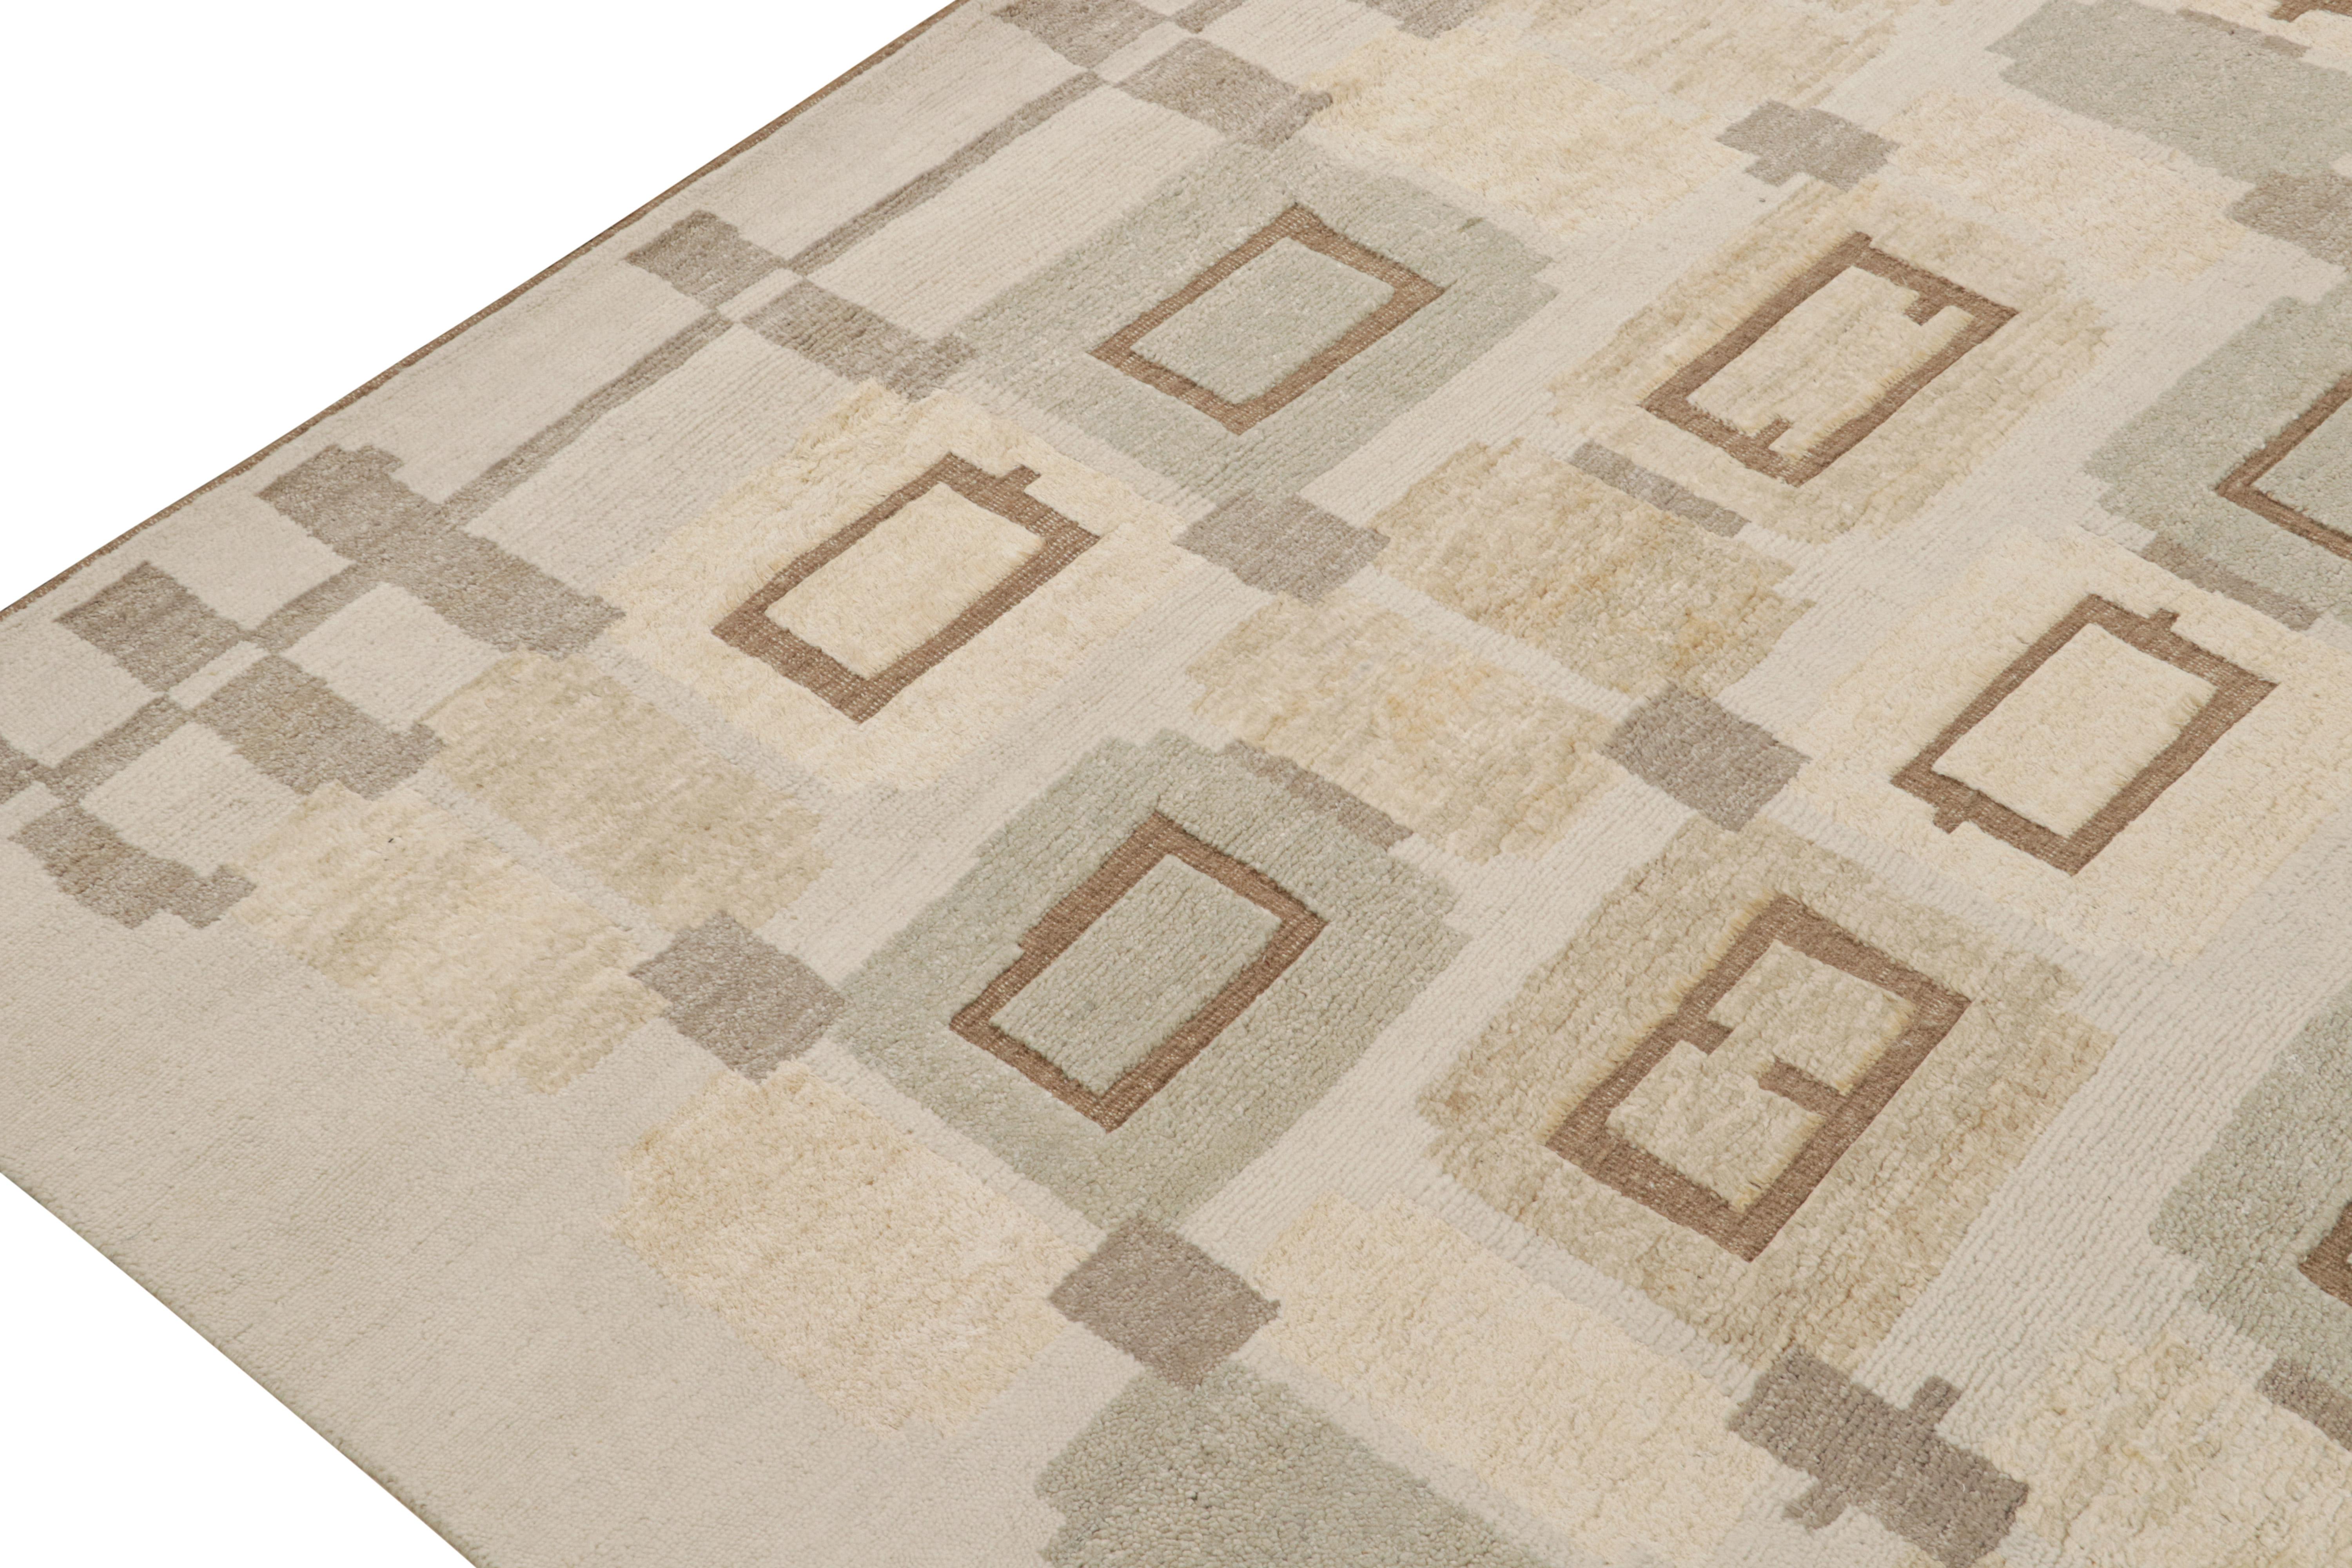 Hand-Woven Rug & Kilim’s Scandinavian Style Rug in Greige, Brown & Cream Geometric Patterns For Sale